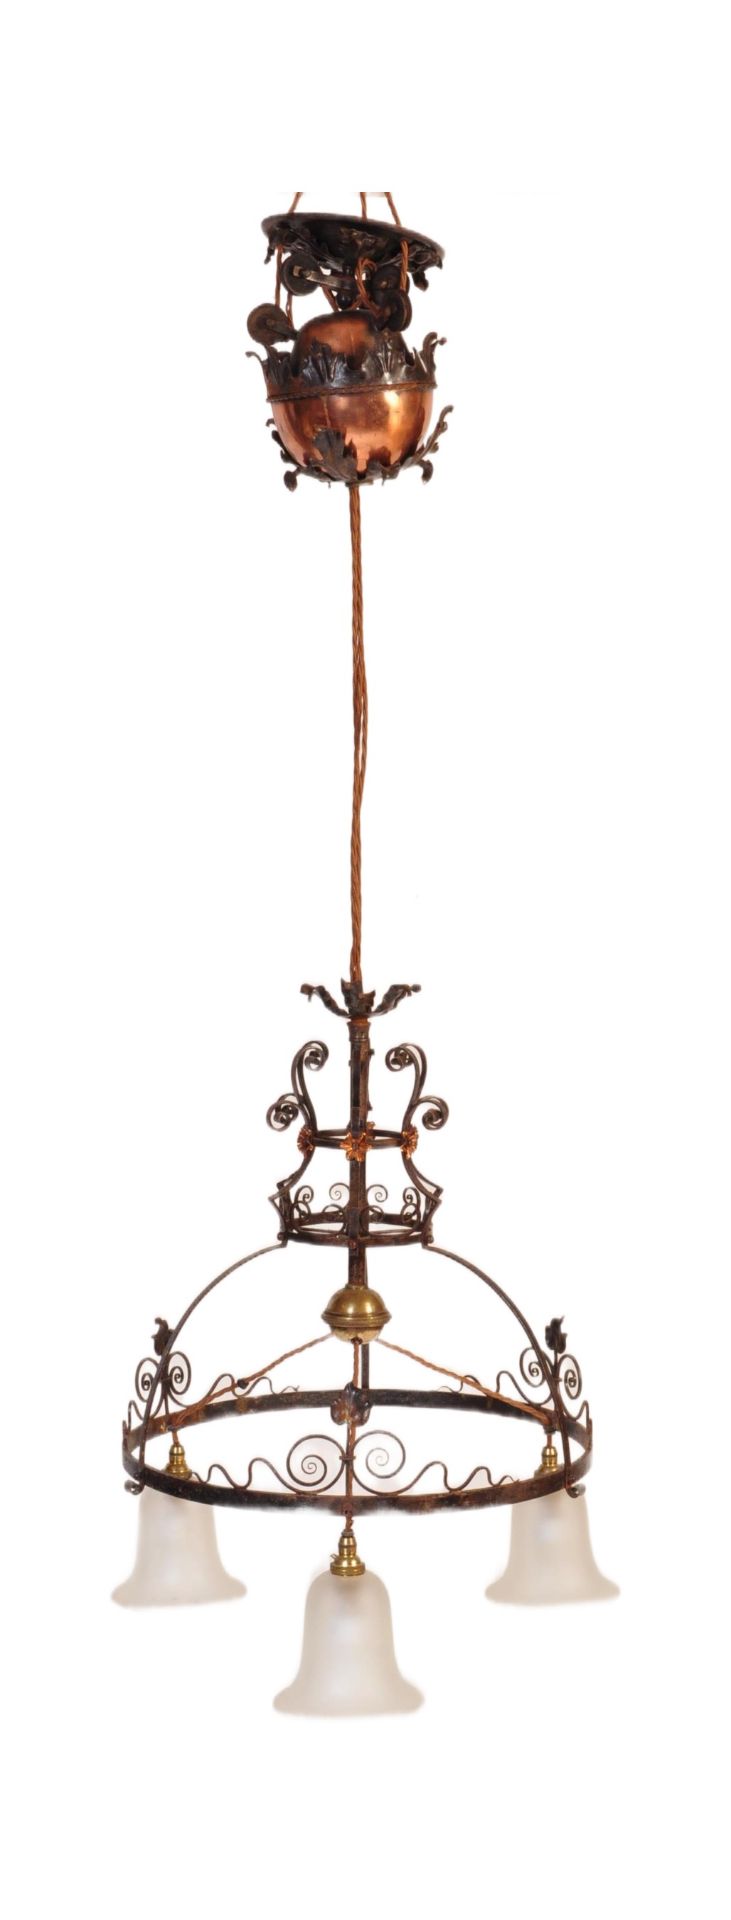 20TH CENTURY COPPER & WROUGHT IRON CEILING LIGHT LAMP